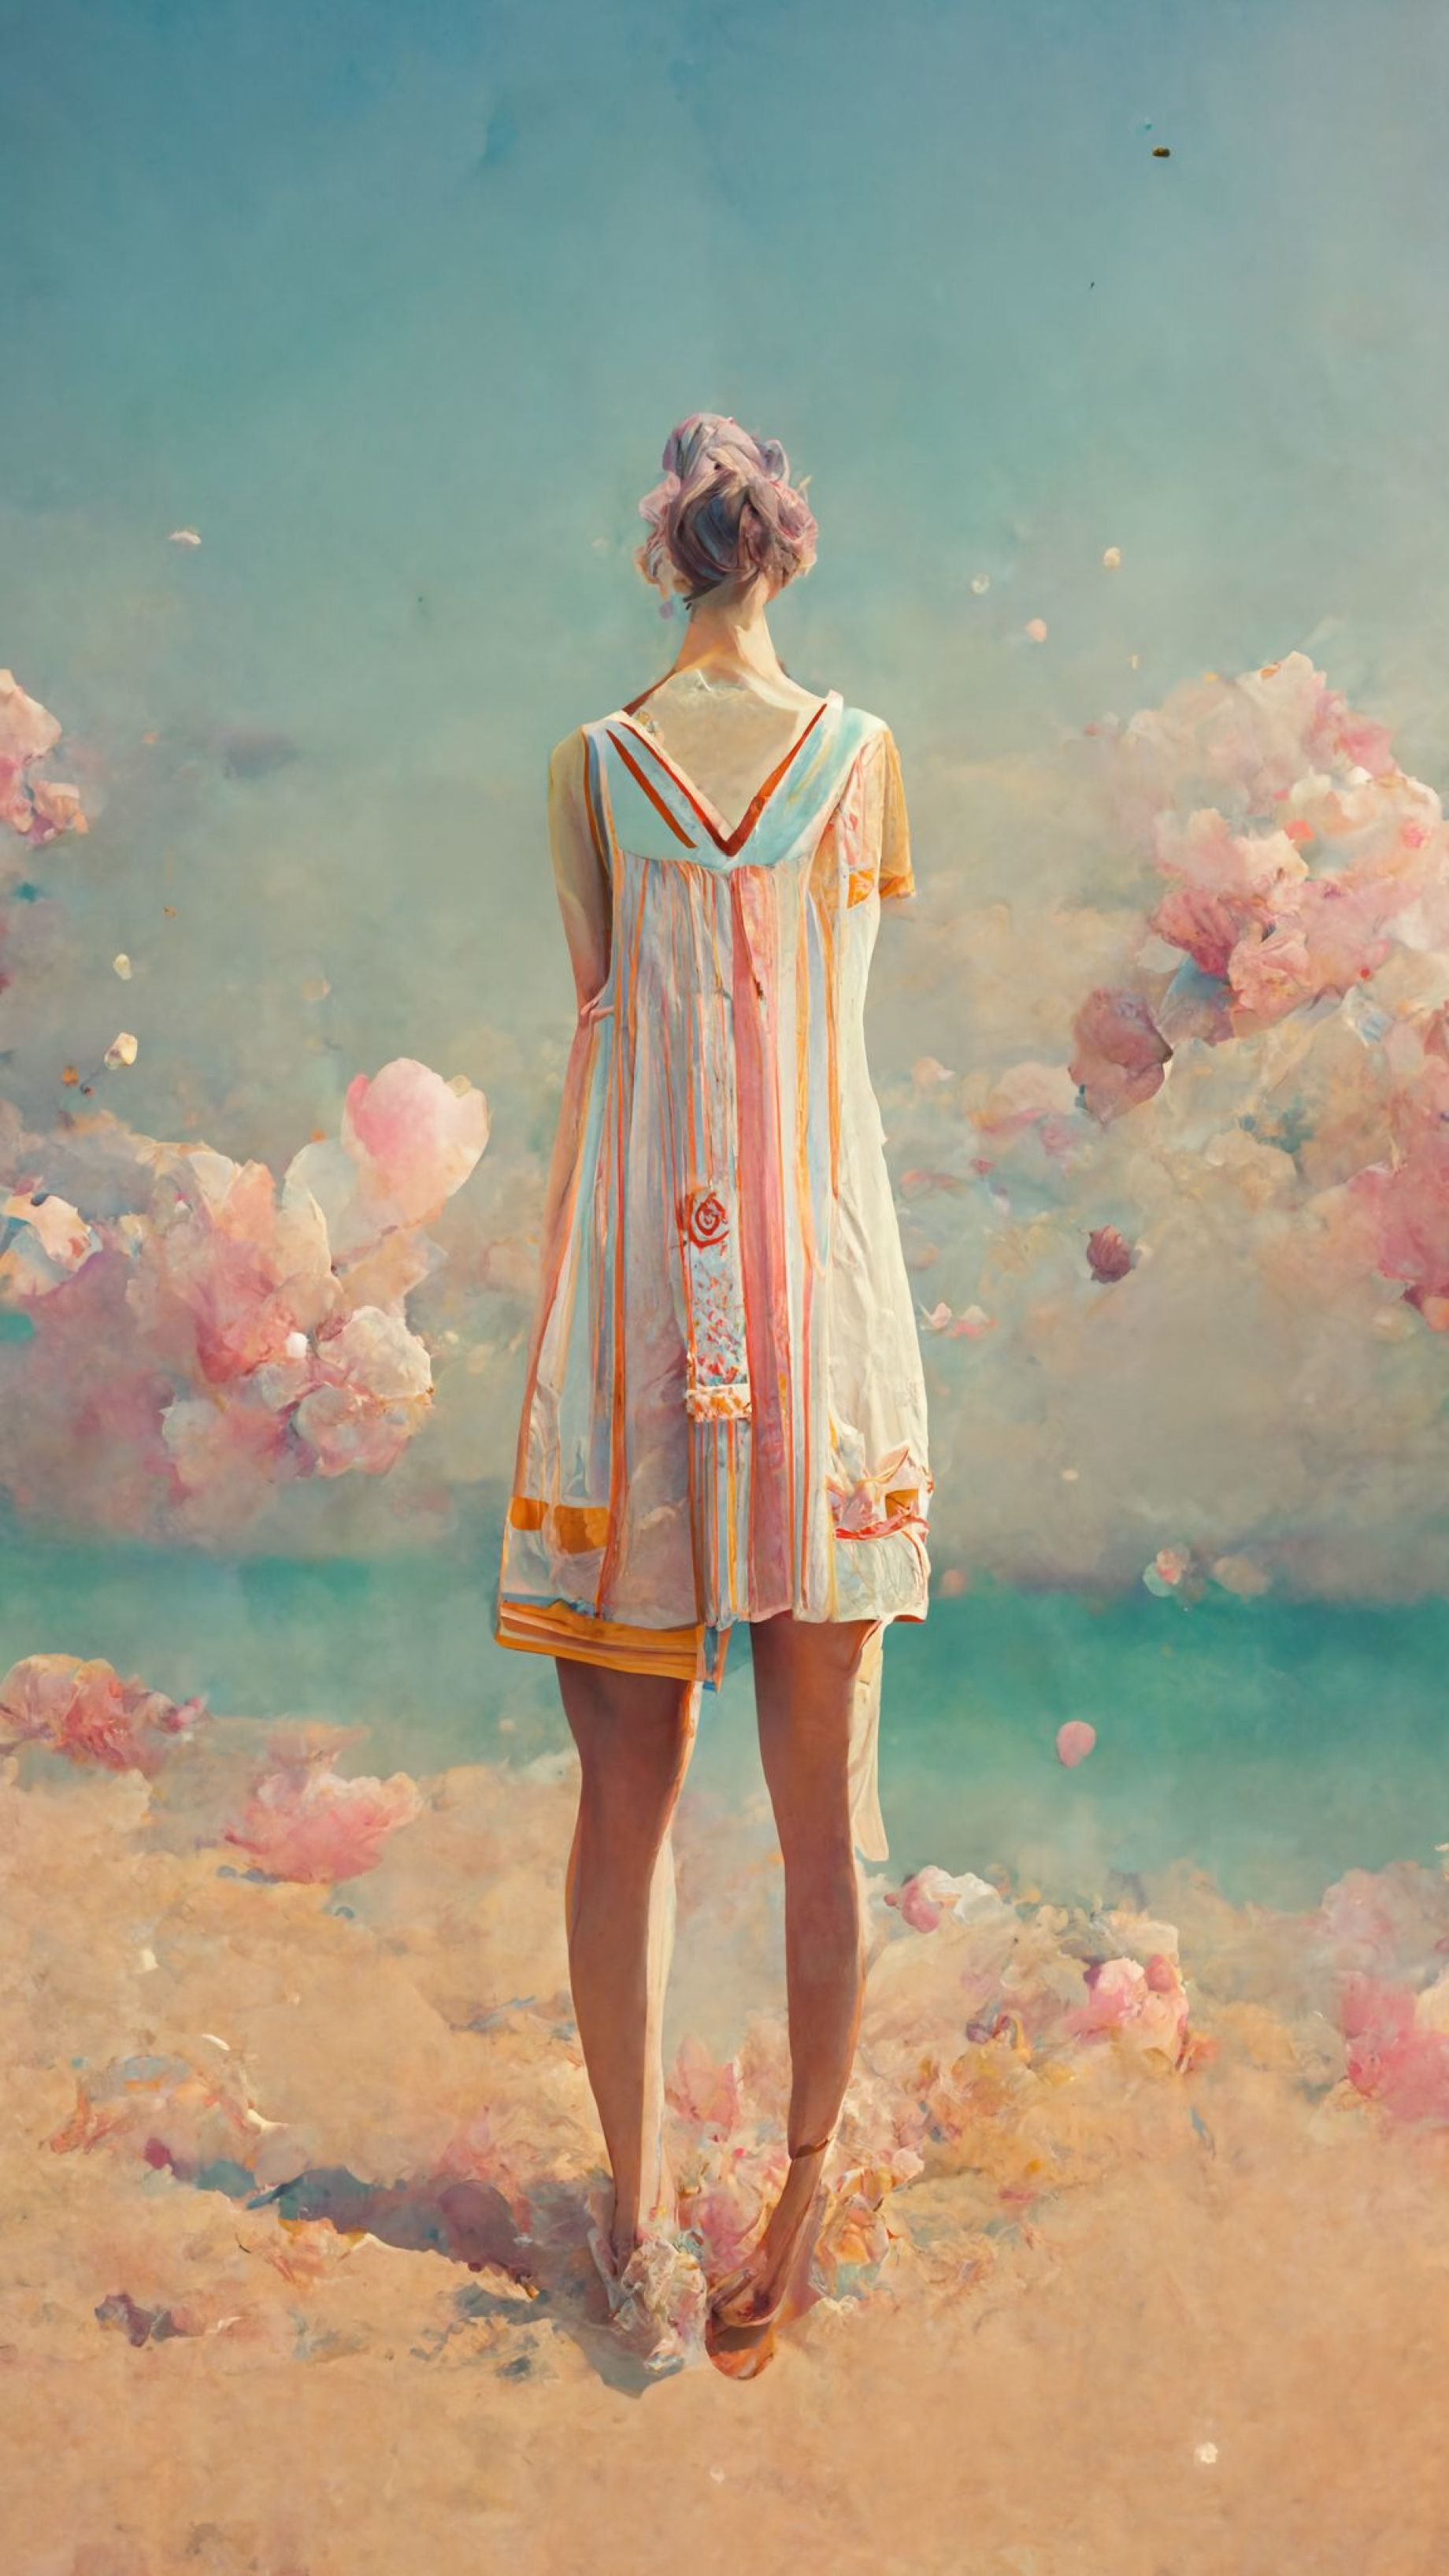 Fashion Collection in the Style of Wes Anderson Made by Midjourney